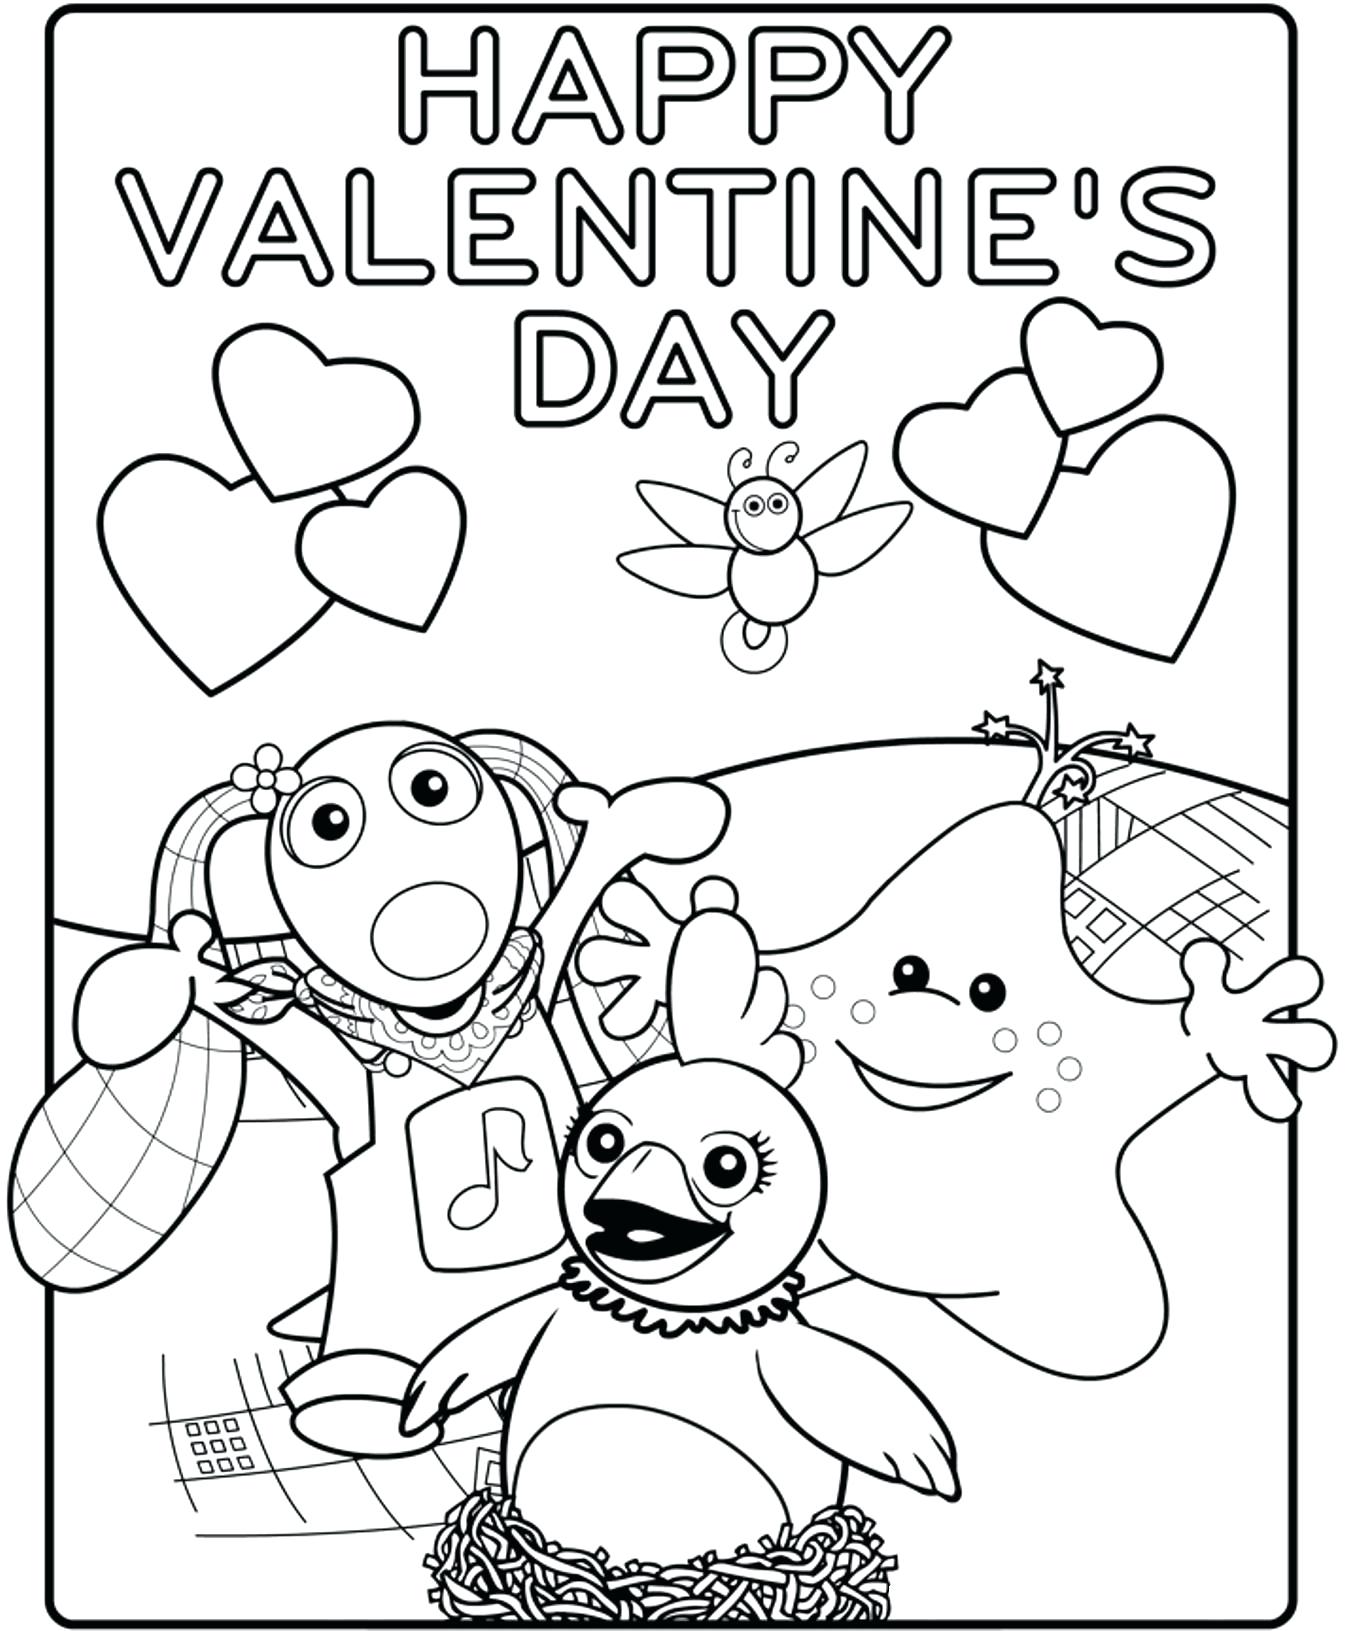 spongebob-valentines-day-coloring-pages-at-getcolorings-free-printable-colorings-pages-to